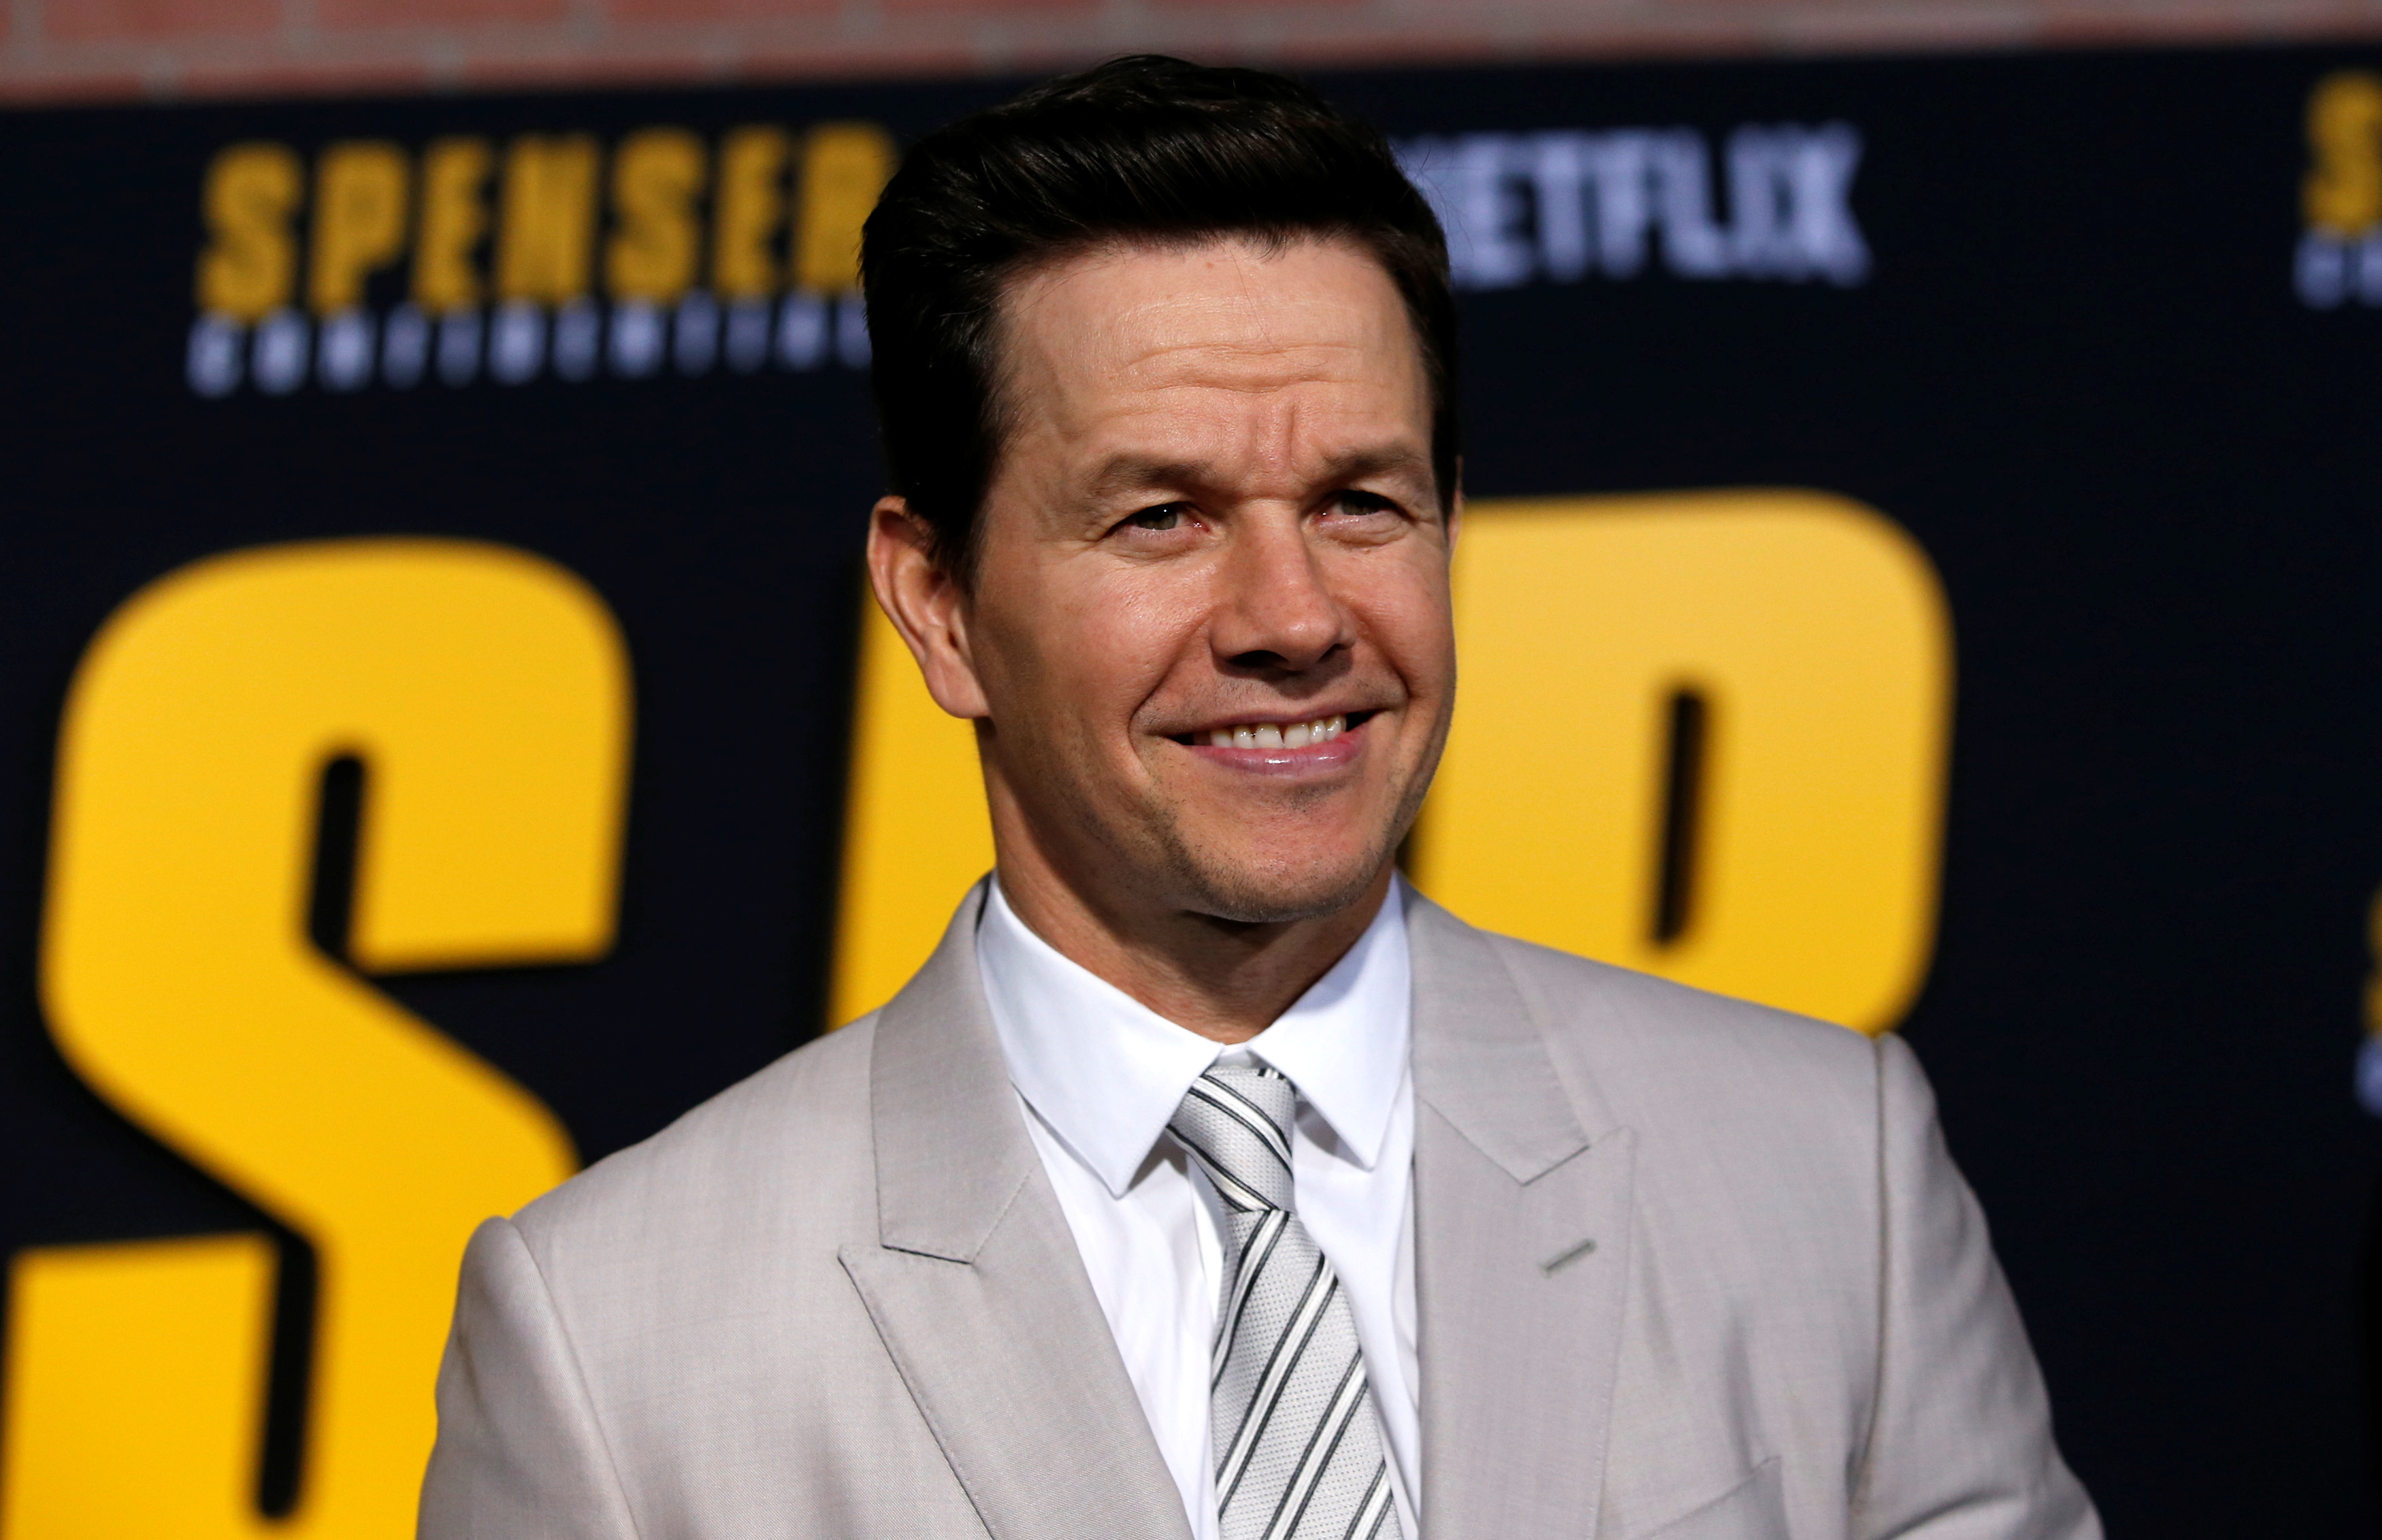 Cast member Mark Wahlberg poses at the premiere for the film 